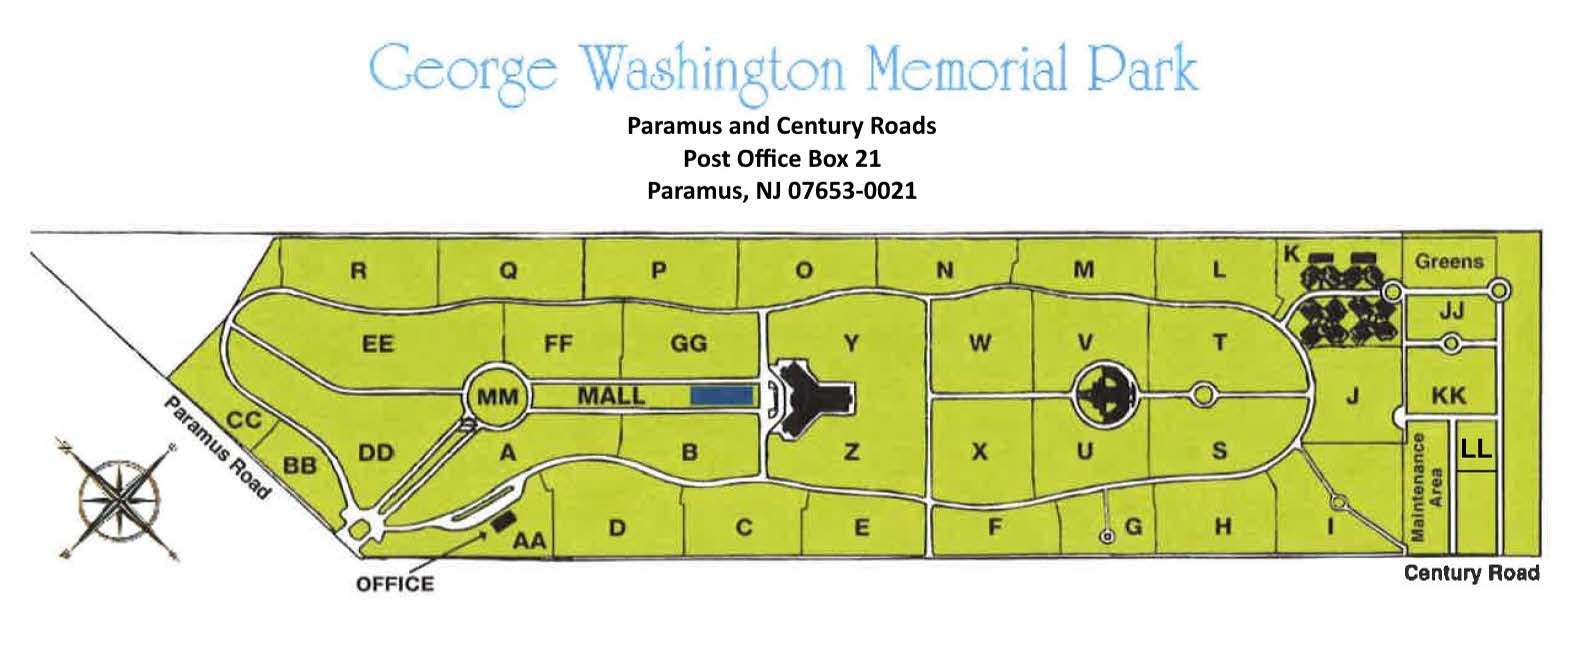 Cemetery map of George Washington Memorial Park in Paramus, New Jersey